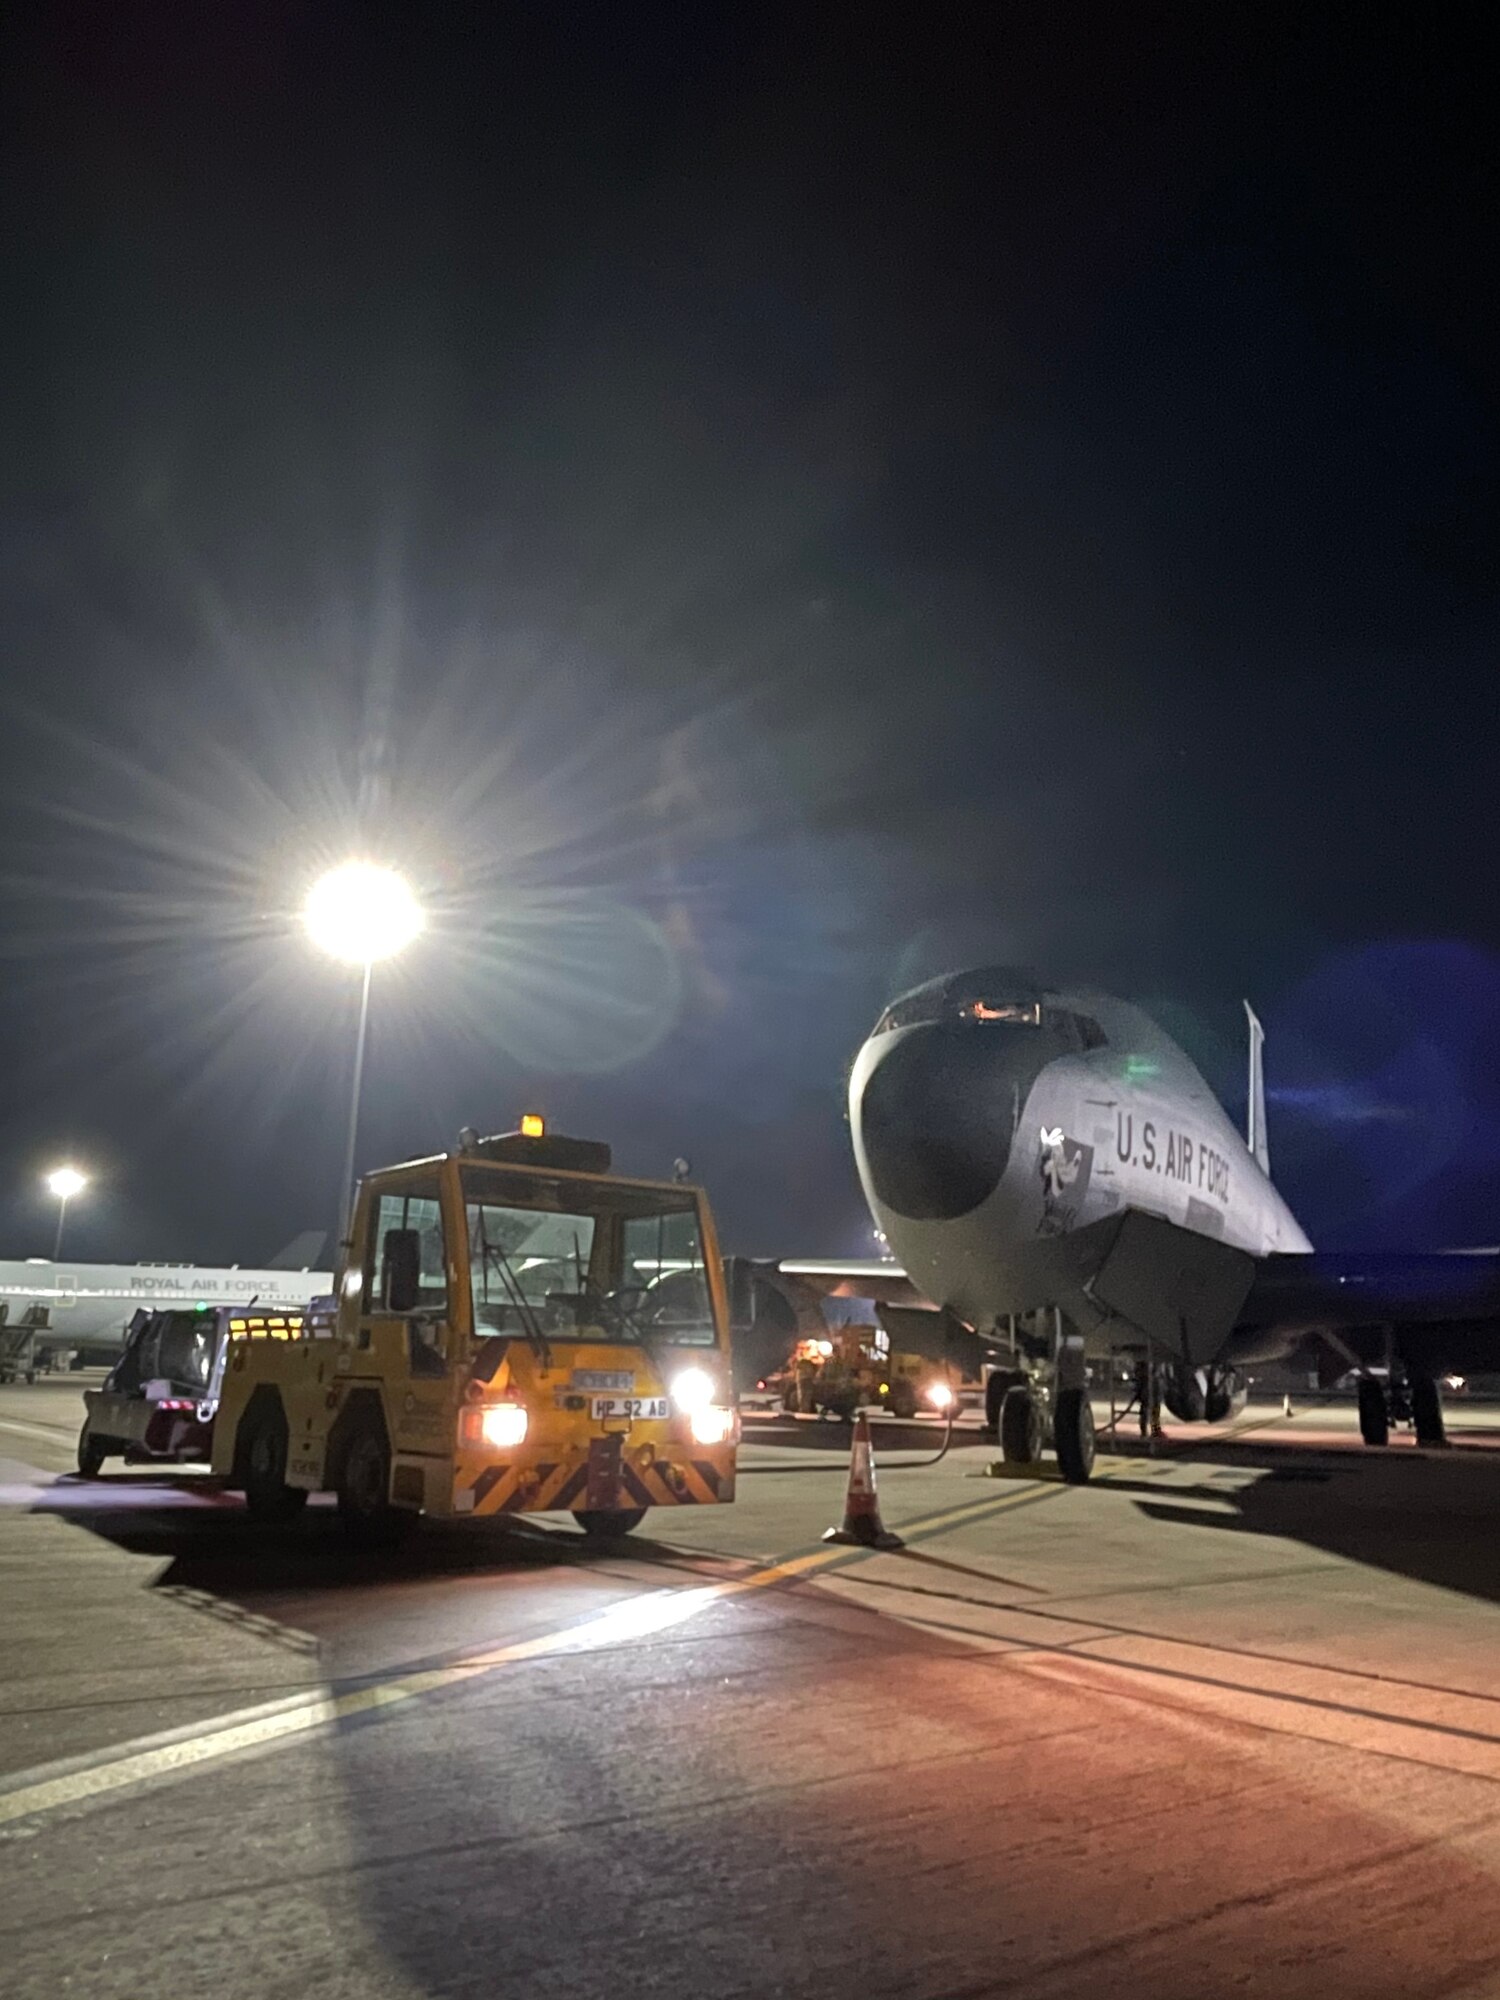 A U.S. Air Force KC-135 Stratotanker aircraft assigned to the 100th Air Refueling Wing, Royal Air Force Mildenhall, England, sits on the flightline during exercise Castle Forge at RAF Brize Norton, England, Nov. 2, 2021. The U.S. Air Force’s forward-deployed forces are engaged, postured and ready with credible force to assure, deter and defend in an increasingly complex security environment. In addition to F-15 Eagle aircraft operations in the Black Sea Region, Castle Forge encompasses the USAFE-wide Agile Combat Employment capstone event. Castle Forge’s components will better enable forces to quickly disperse and continue to deliver air power from locations with varying levels of capacity and support, ensuring Airmen are always ready to respond to potential threats.  (U.S. Air Force photo by Senior Airman Joseph Barron)